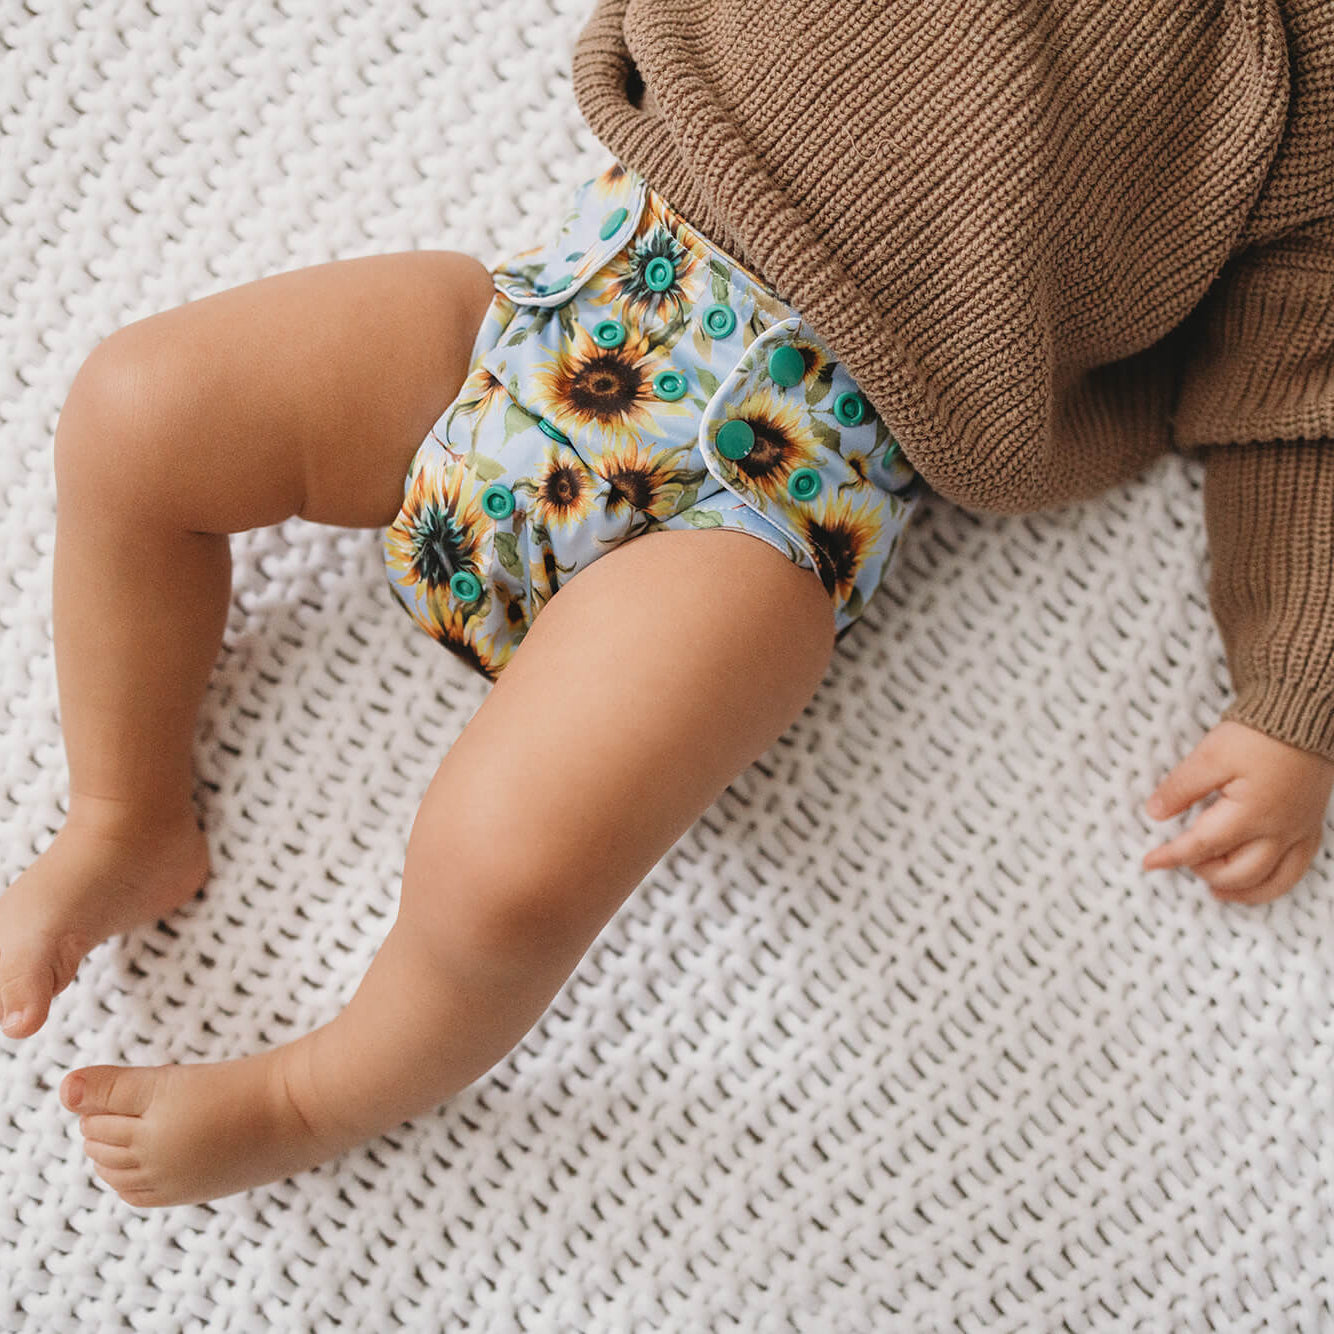 What are Pocket Cloth Diapers?